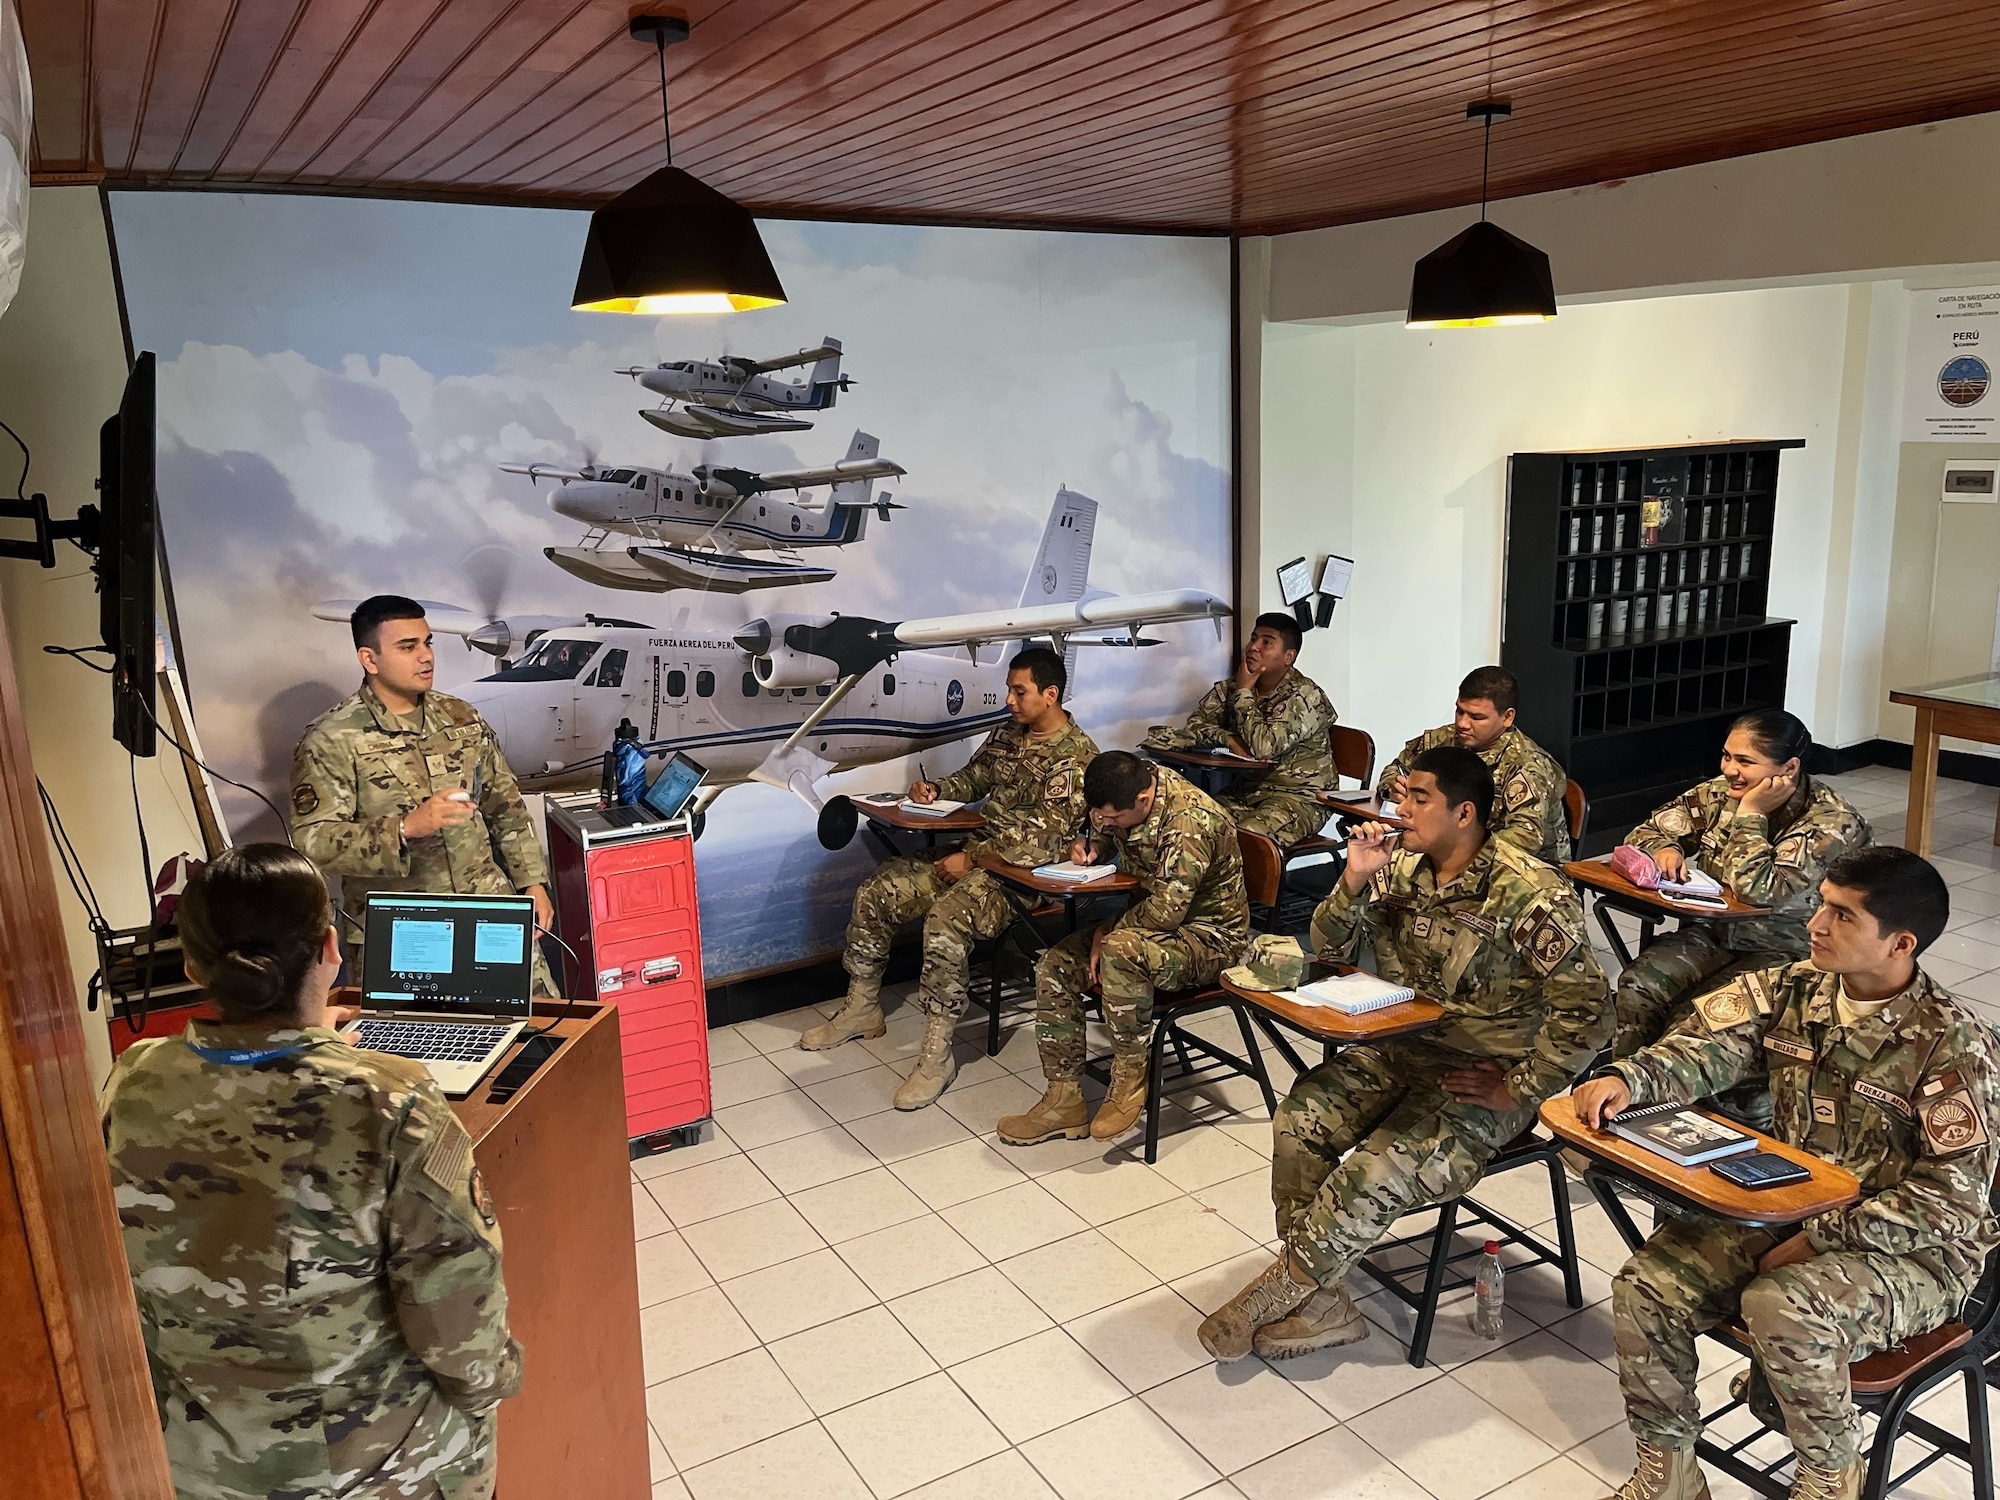 U.S. Air Force Staff Sgt. Sukhpreet Chinna, top left, a 571st Mobility Support Advisory Squadron advisor, instructs military service members of the Fuerza Aérea de Peru, Aug. 26, 2022, in Base Area Coronel Francisco Secada Vignetta Air Base, Peru. The purpose of the training was to build partner capacity between the United States Air Force and the Peruvian Air Force equivalent, known as Fuerza Aérea de Peru (FAP). (U.S. Air Force photo by Tech. Sgt. Anthony Garcia)